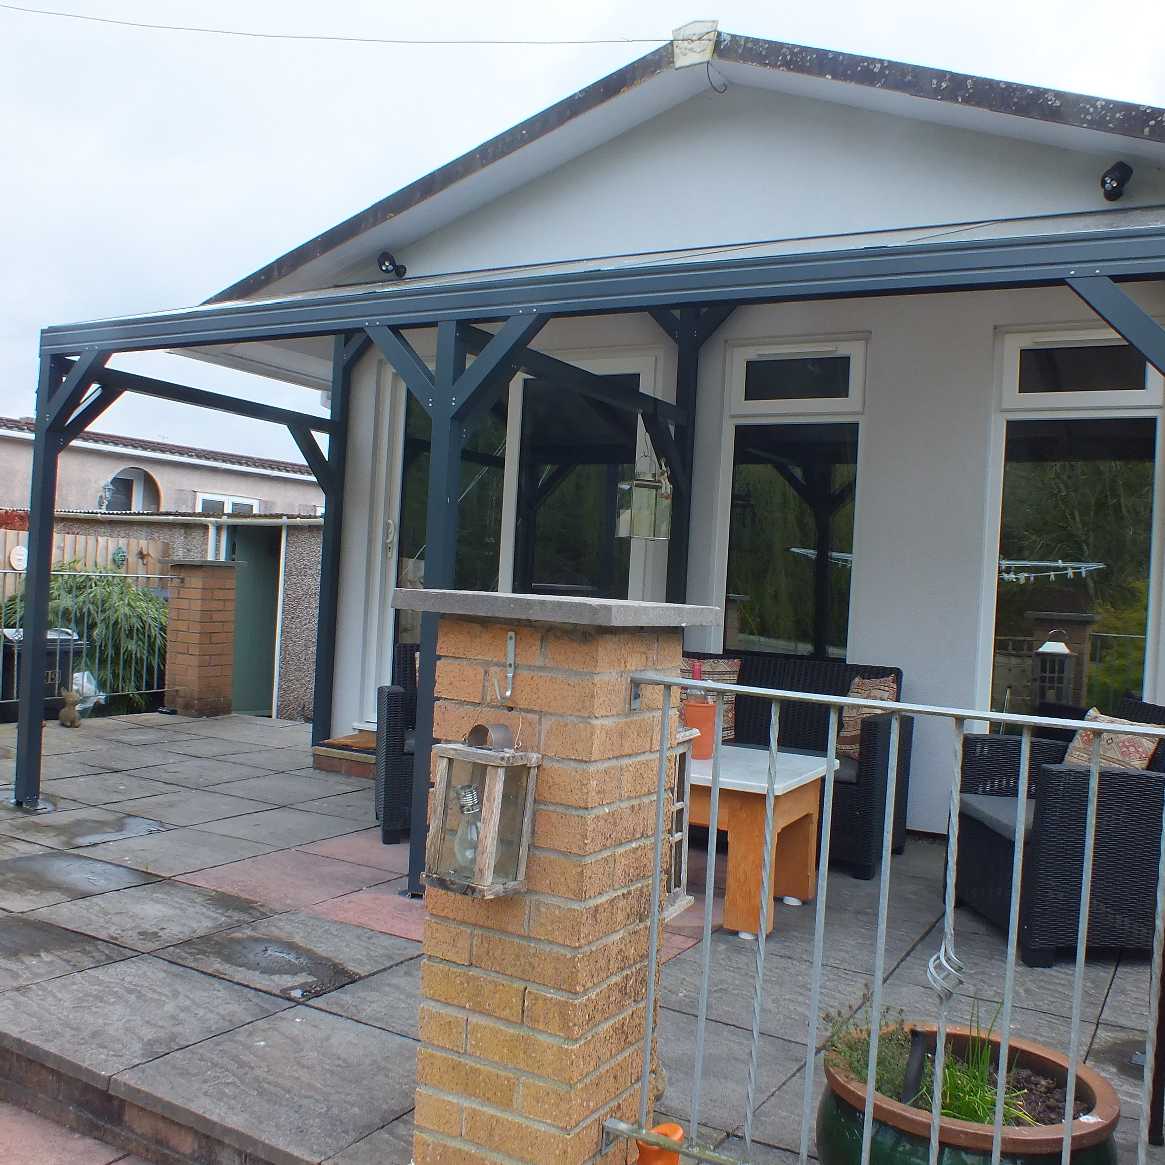 Buy Omega Smart Free-Standing, Anthracite Grey MonoPitch Roof Canopy with 16mm Polycarbonate Glazing - 7.4m (W) x 2.5m (P), (8) Supporting Posts online today